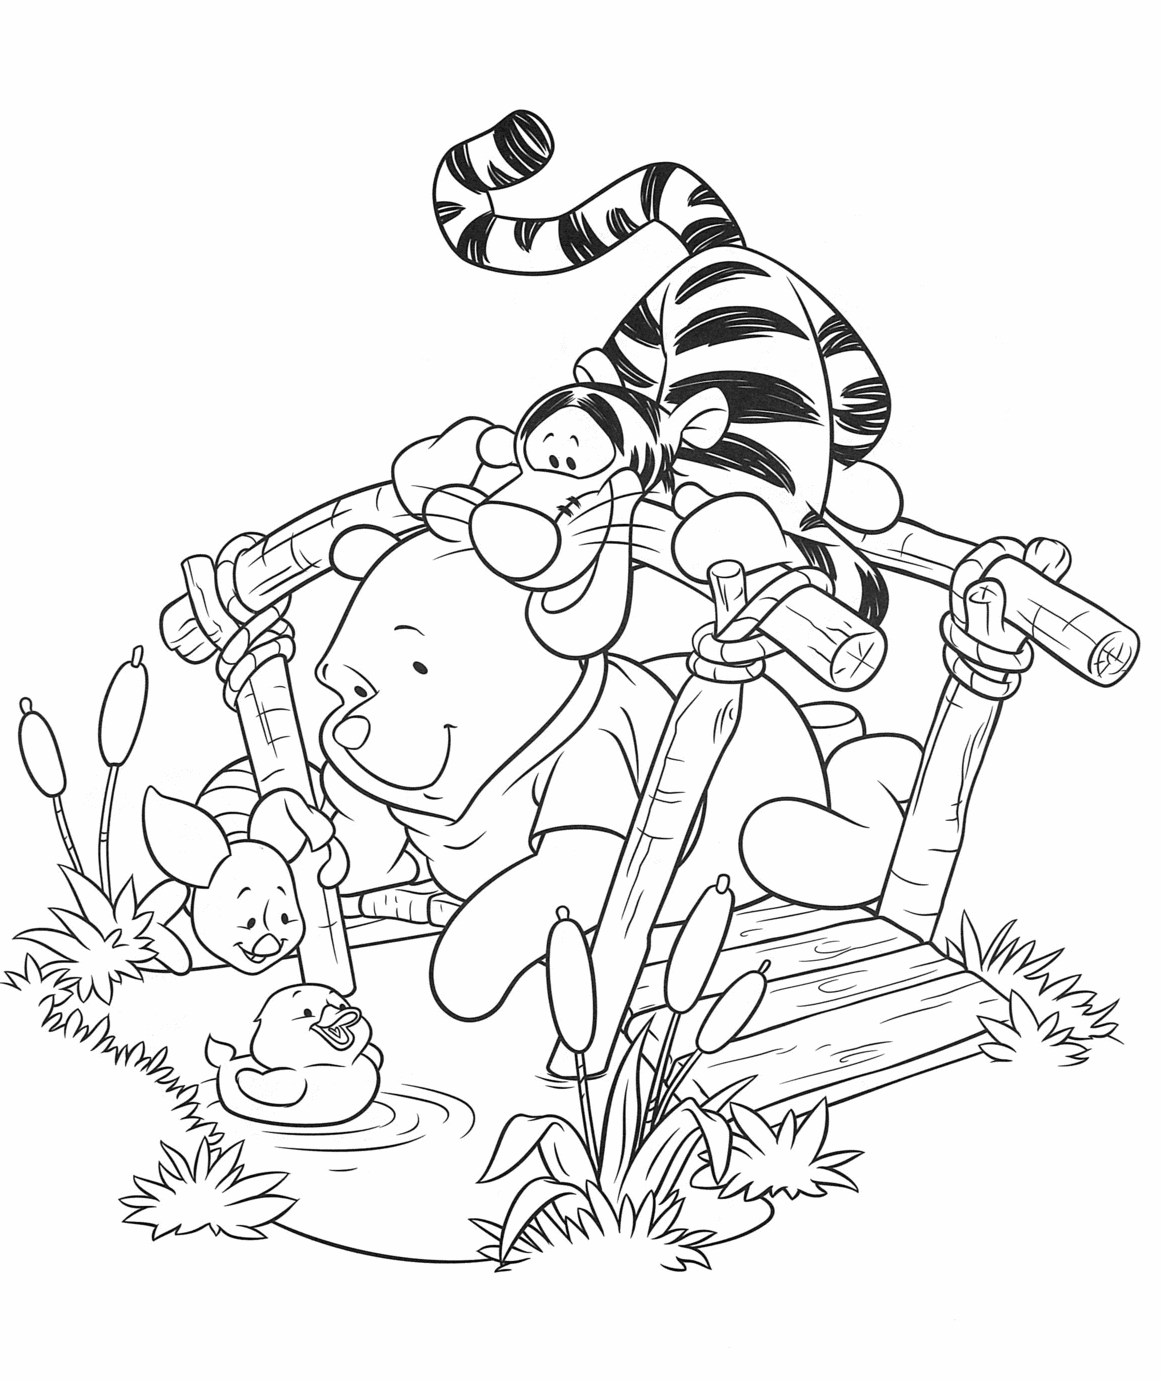 Winnie The Pooh Coloring Pages Google Sogning Winnie The Pooh Winnie The Pooh Picture